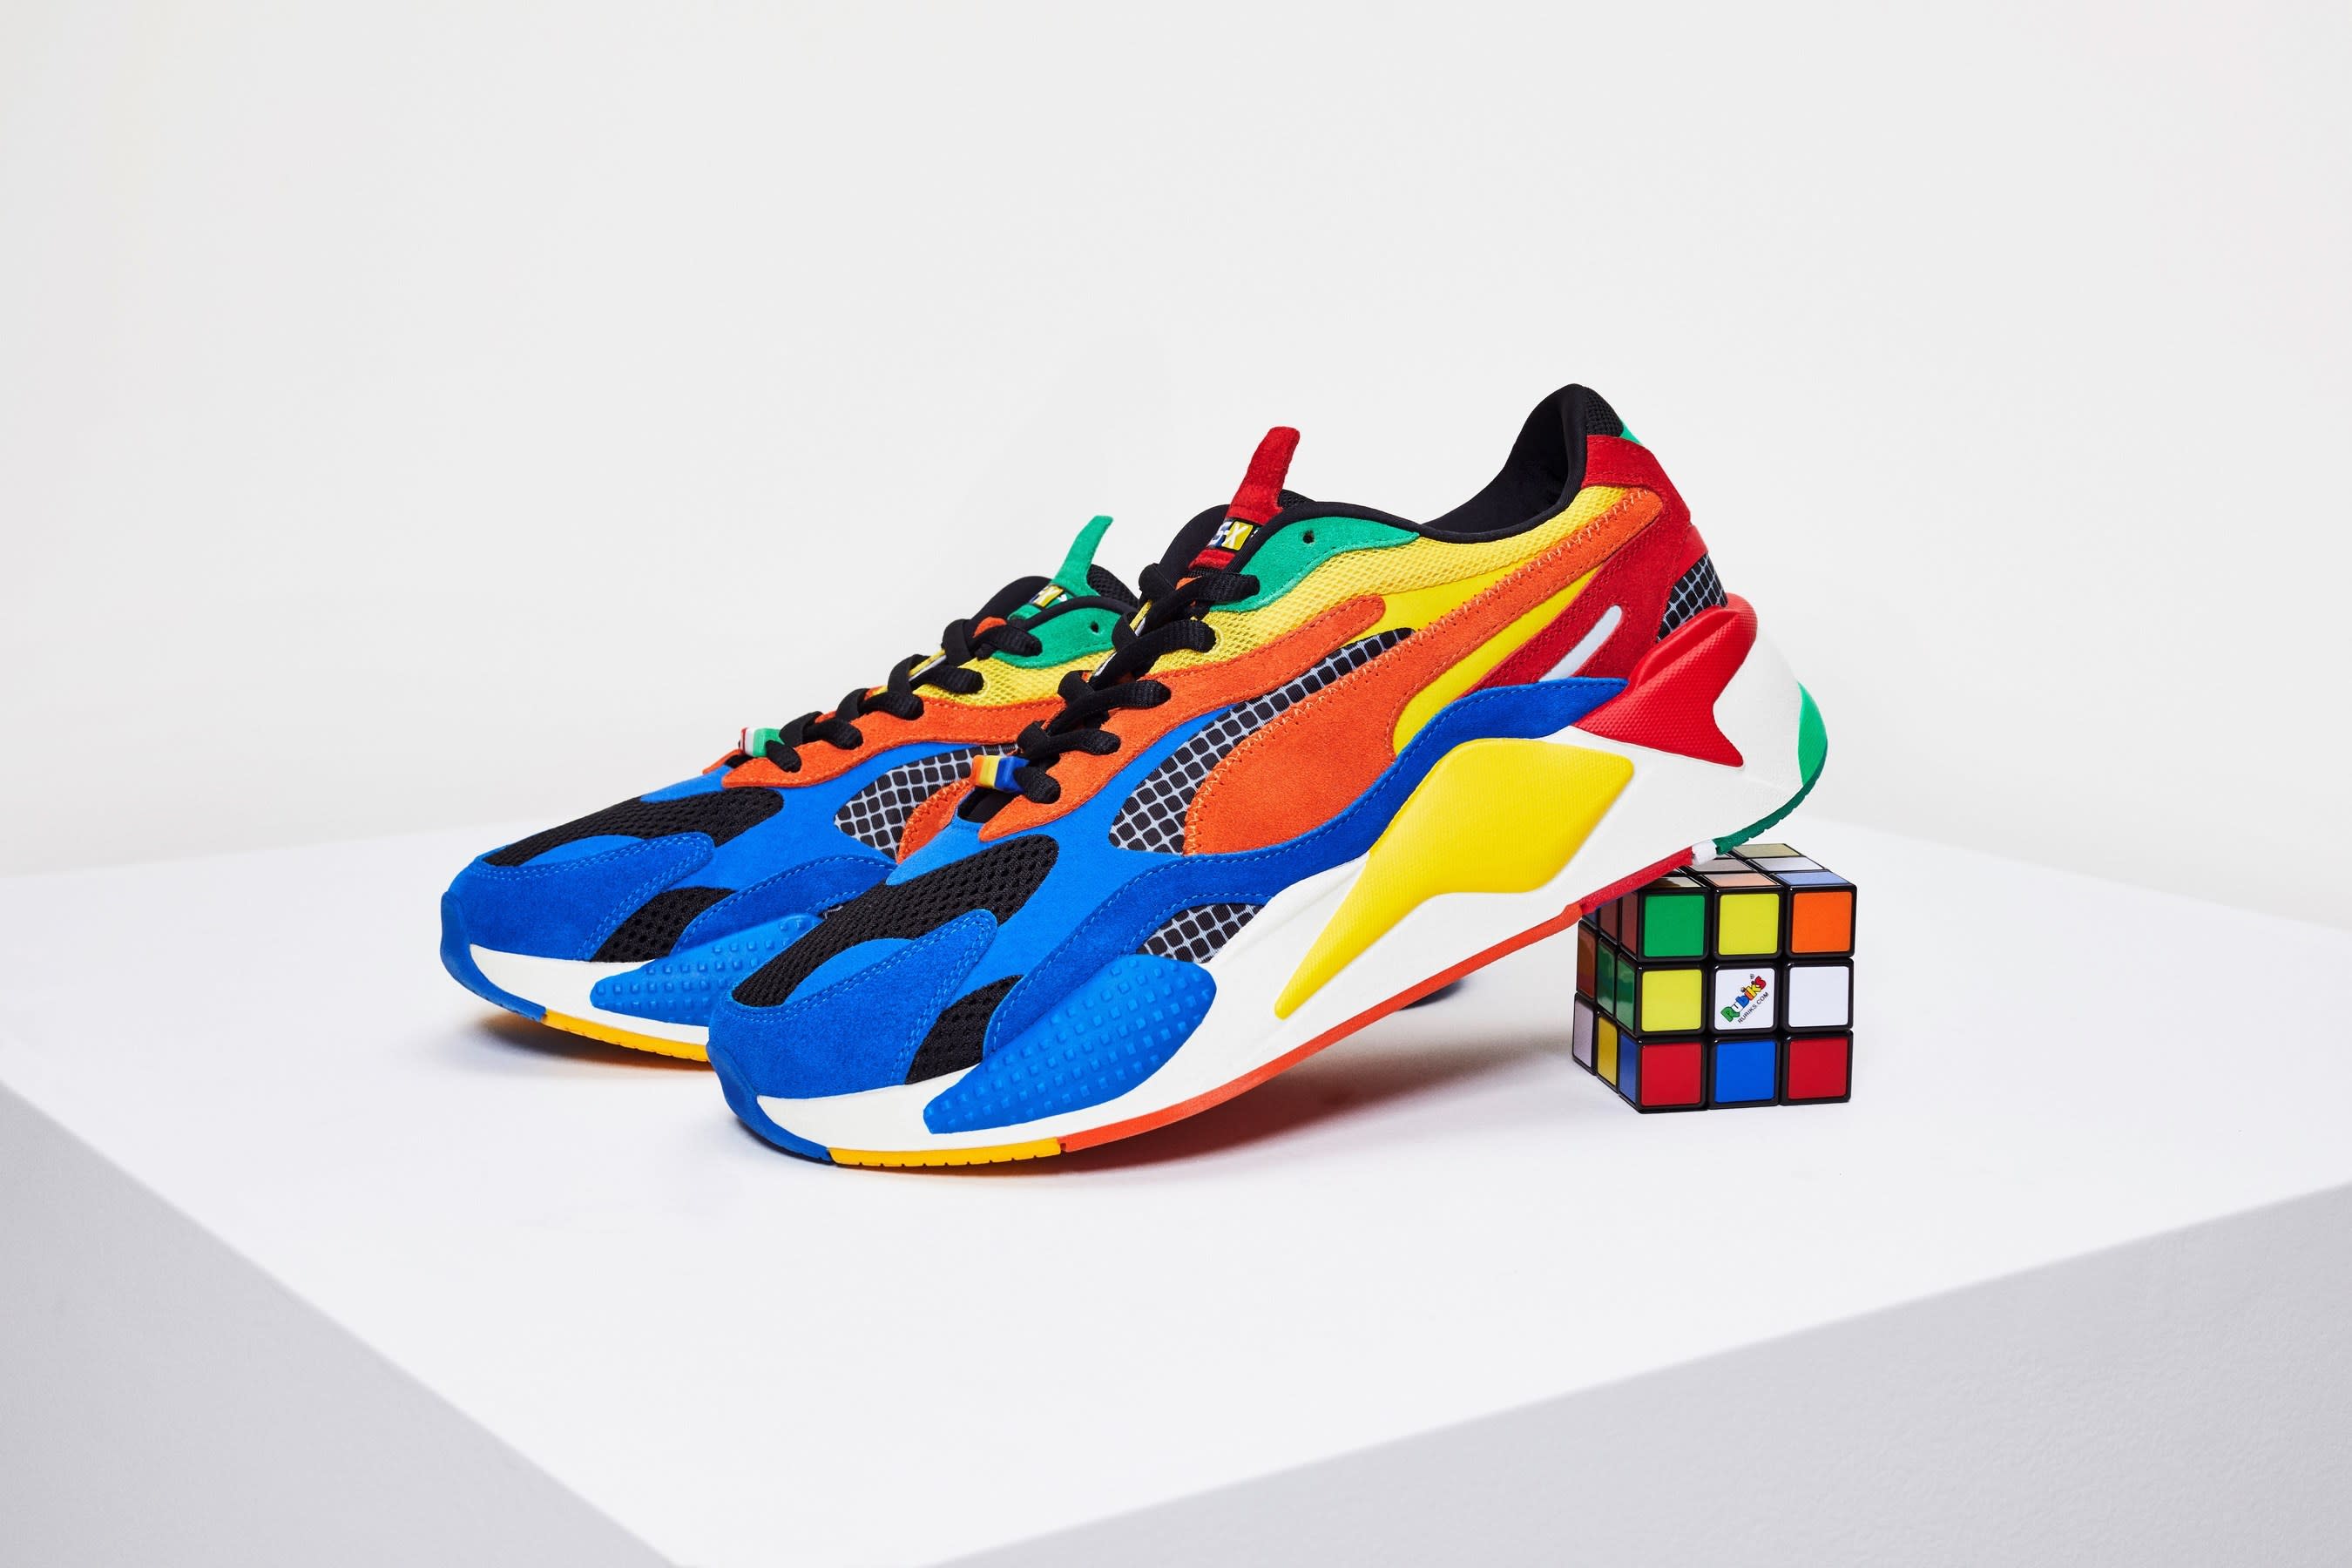 Puma and Rubik's have a colorful 